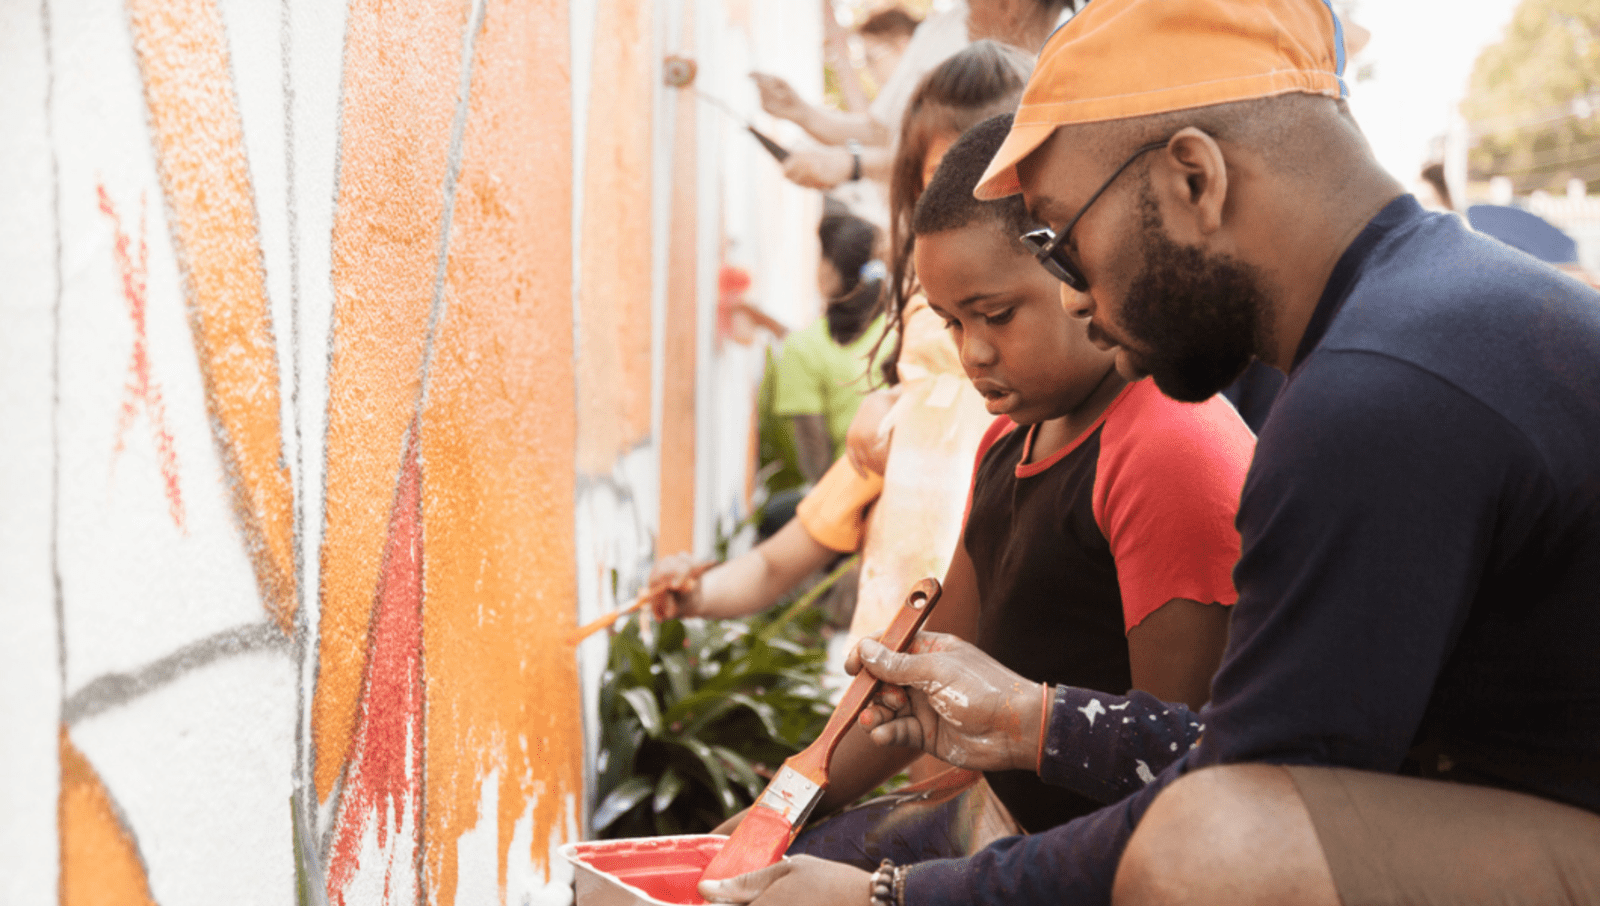 man and young boy painting art on wall with orange paint